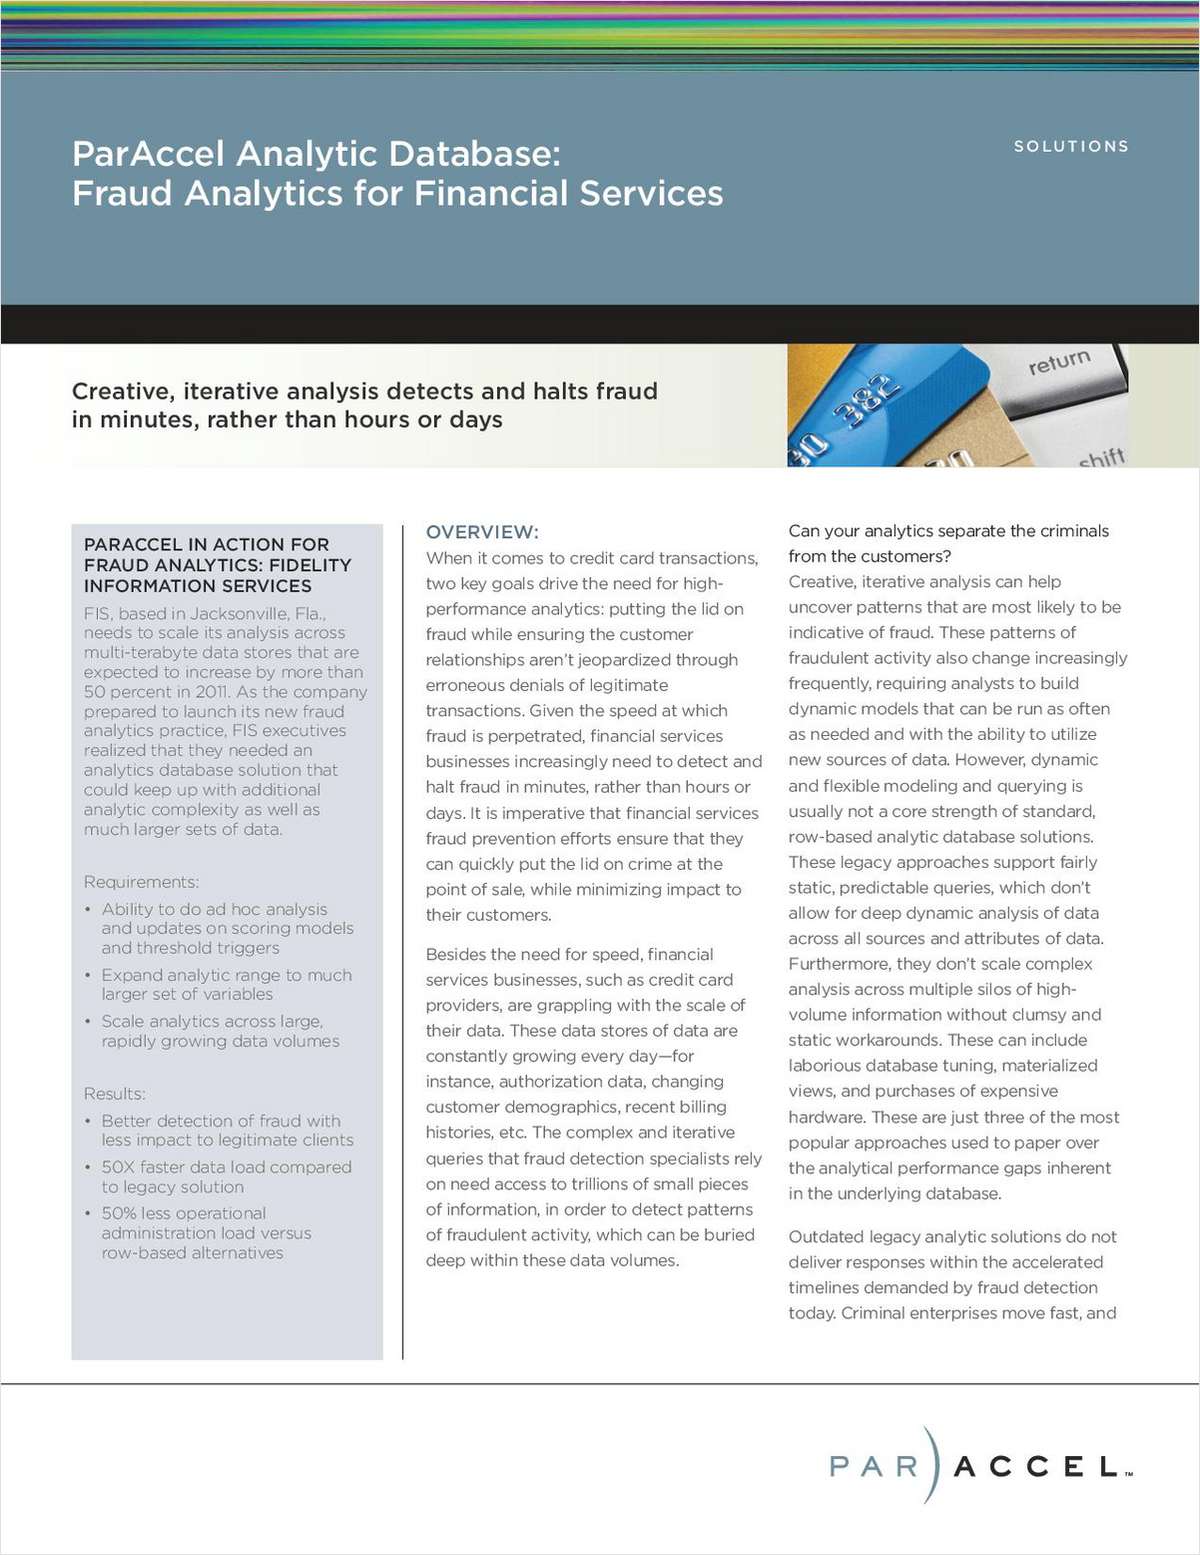 Paraccel Analytic Database: Fraud Analytics for Financial Services